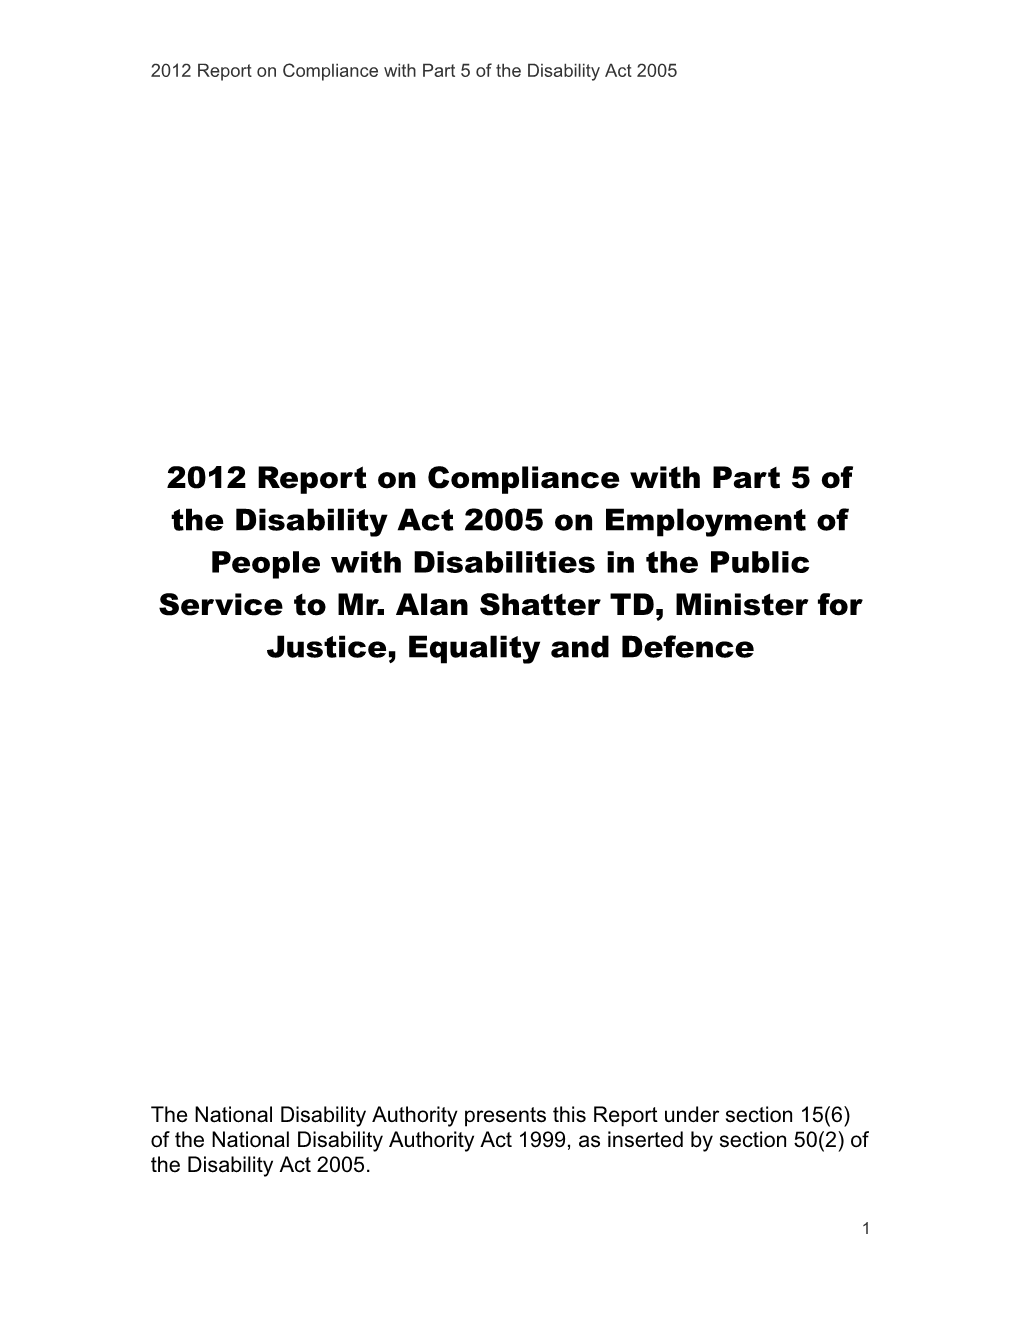 2011 Report on Compliance with Part 5 of the Disability Act 2005 on Employment of People